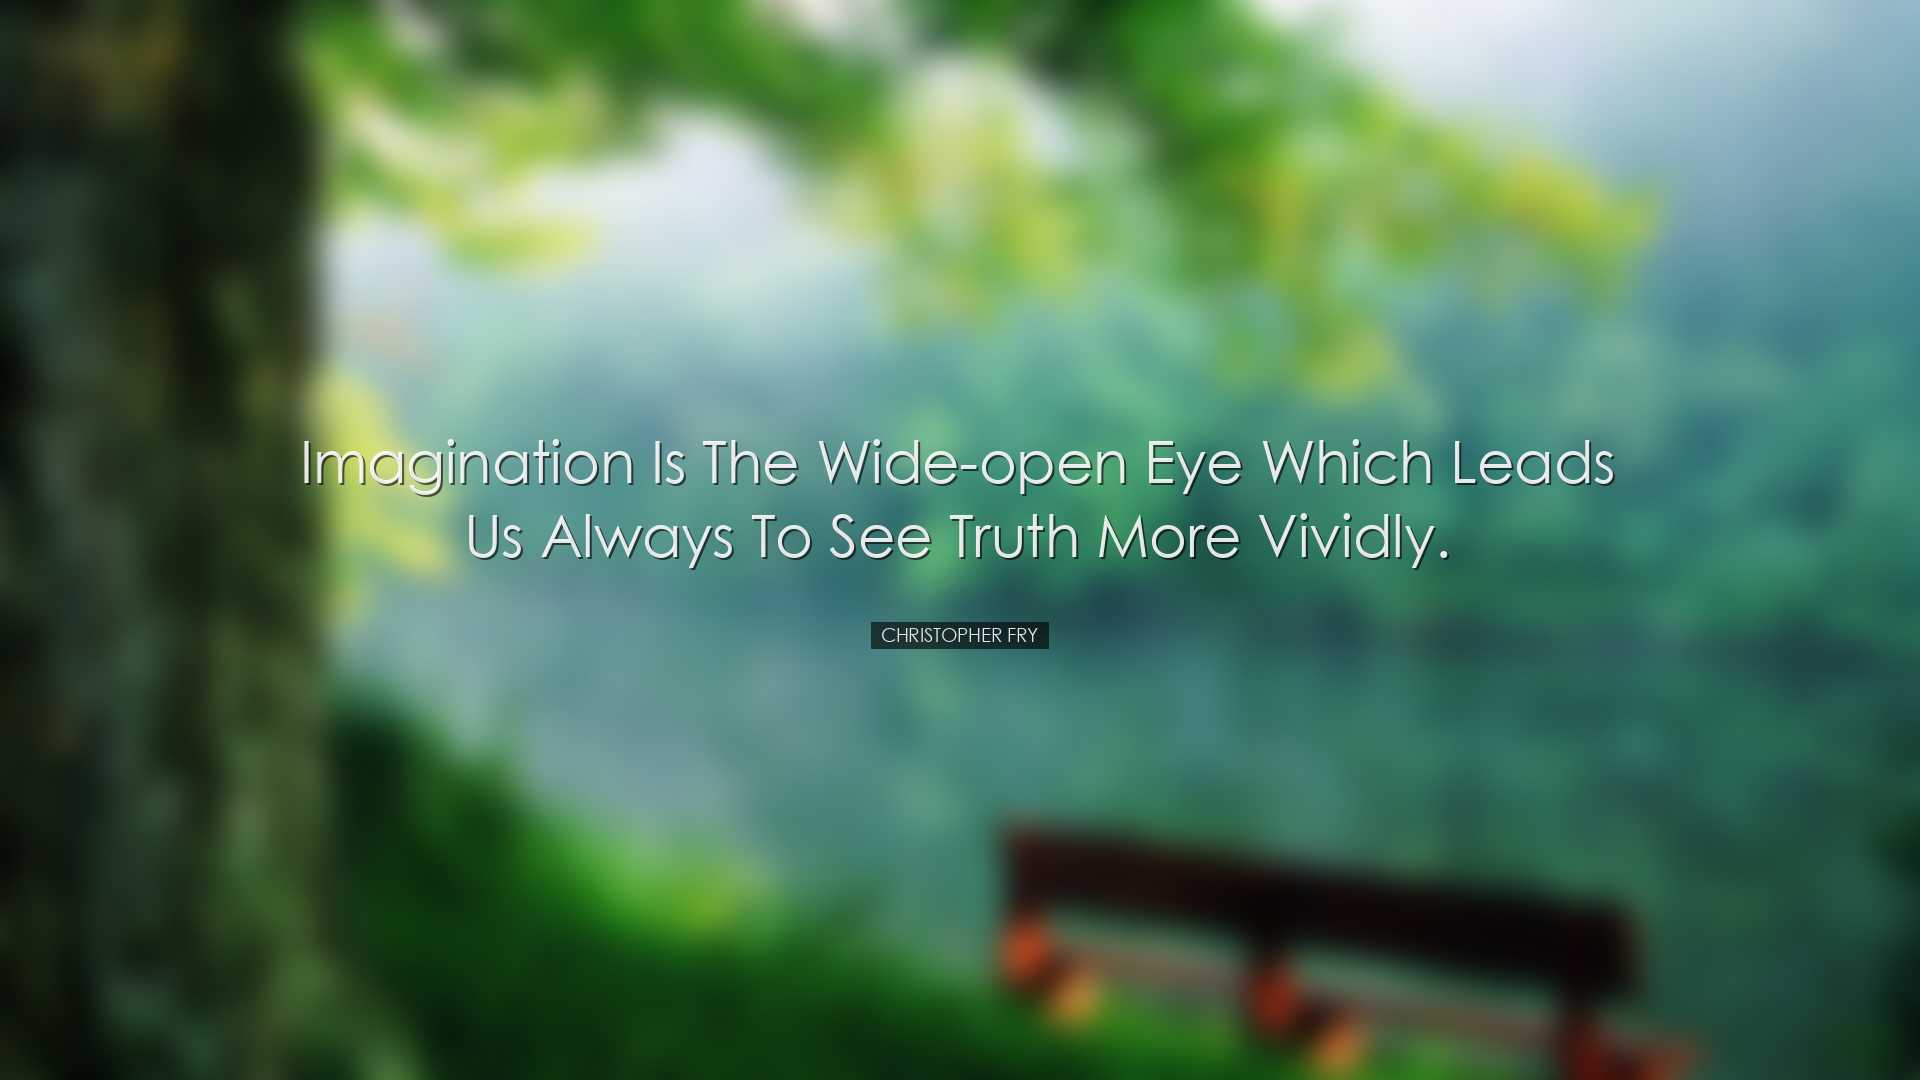 Imagination is the wide-open eye which leads us always to see trut